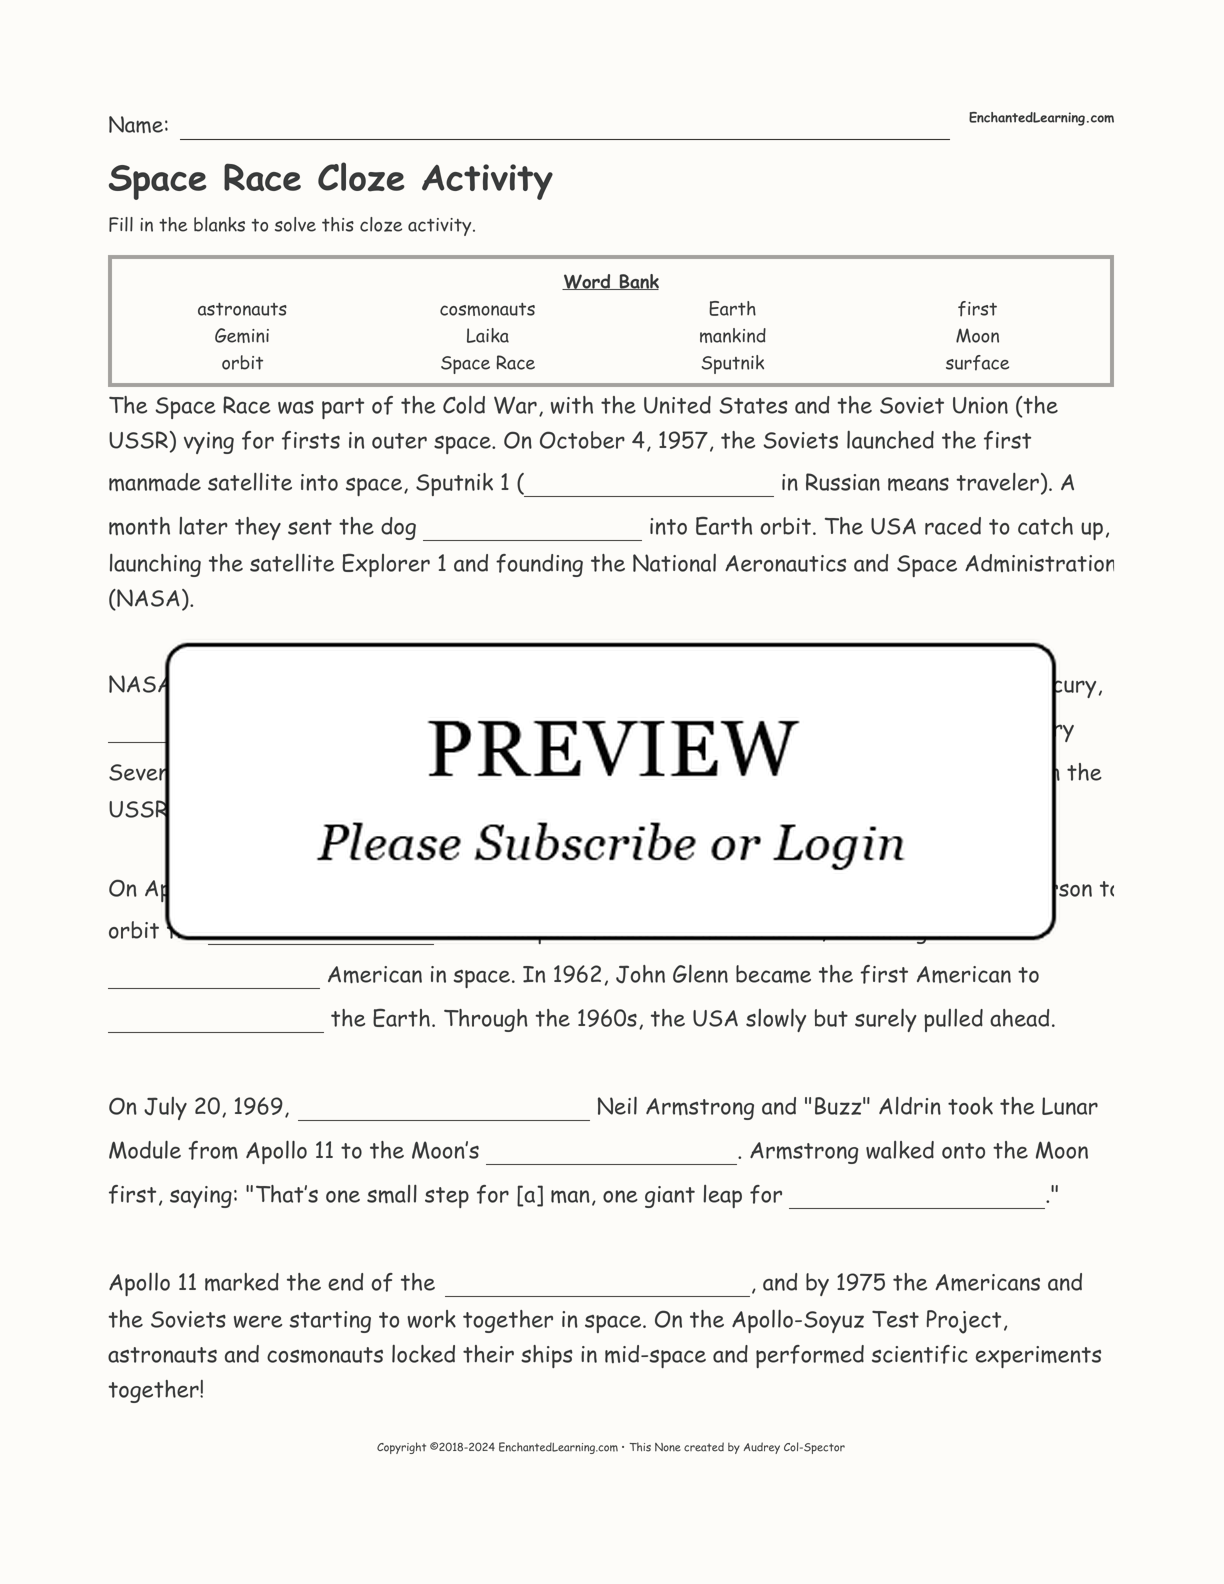 Space Race Cloze Activity interactive worksheet page 1